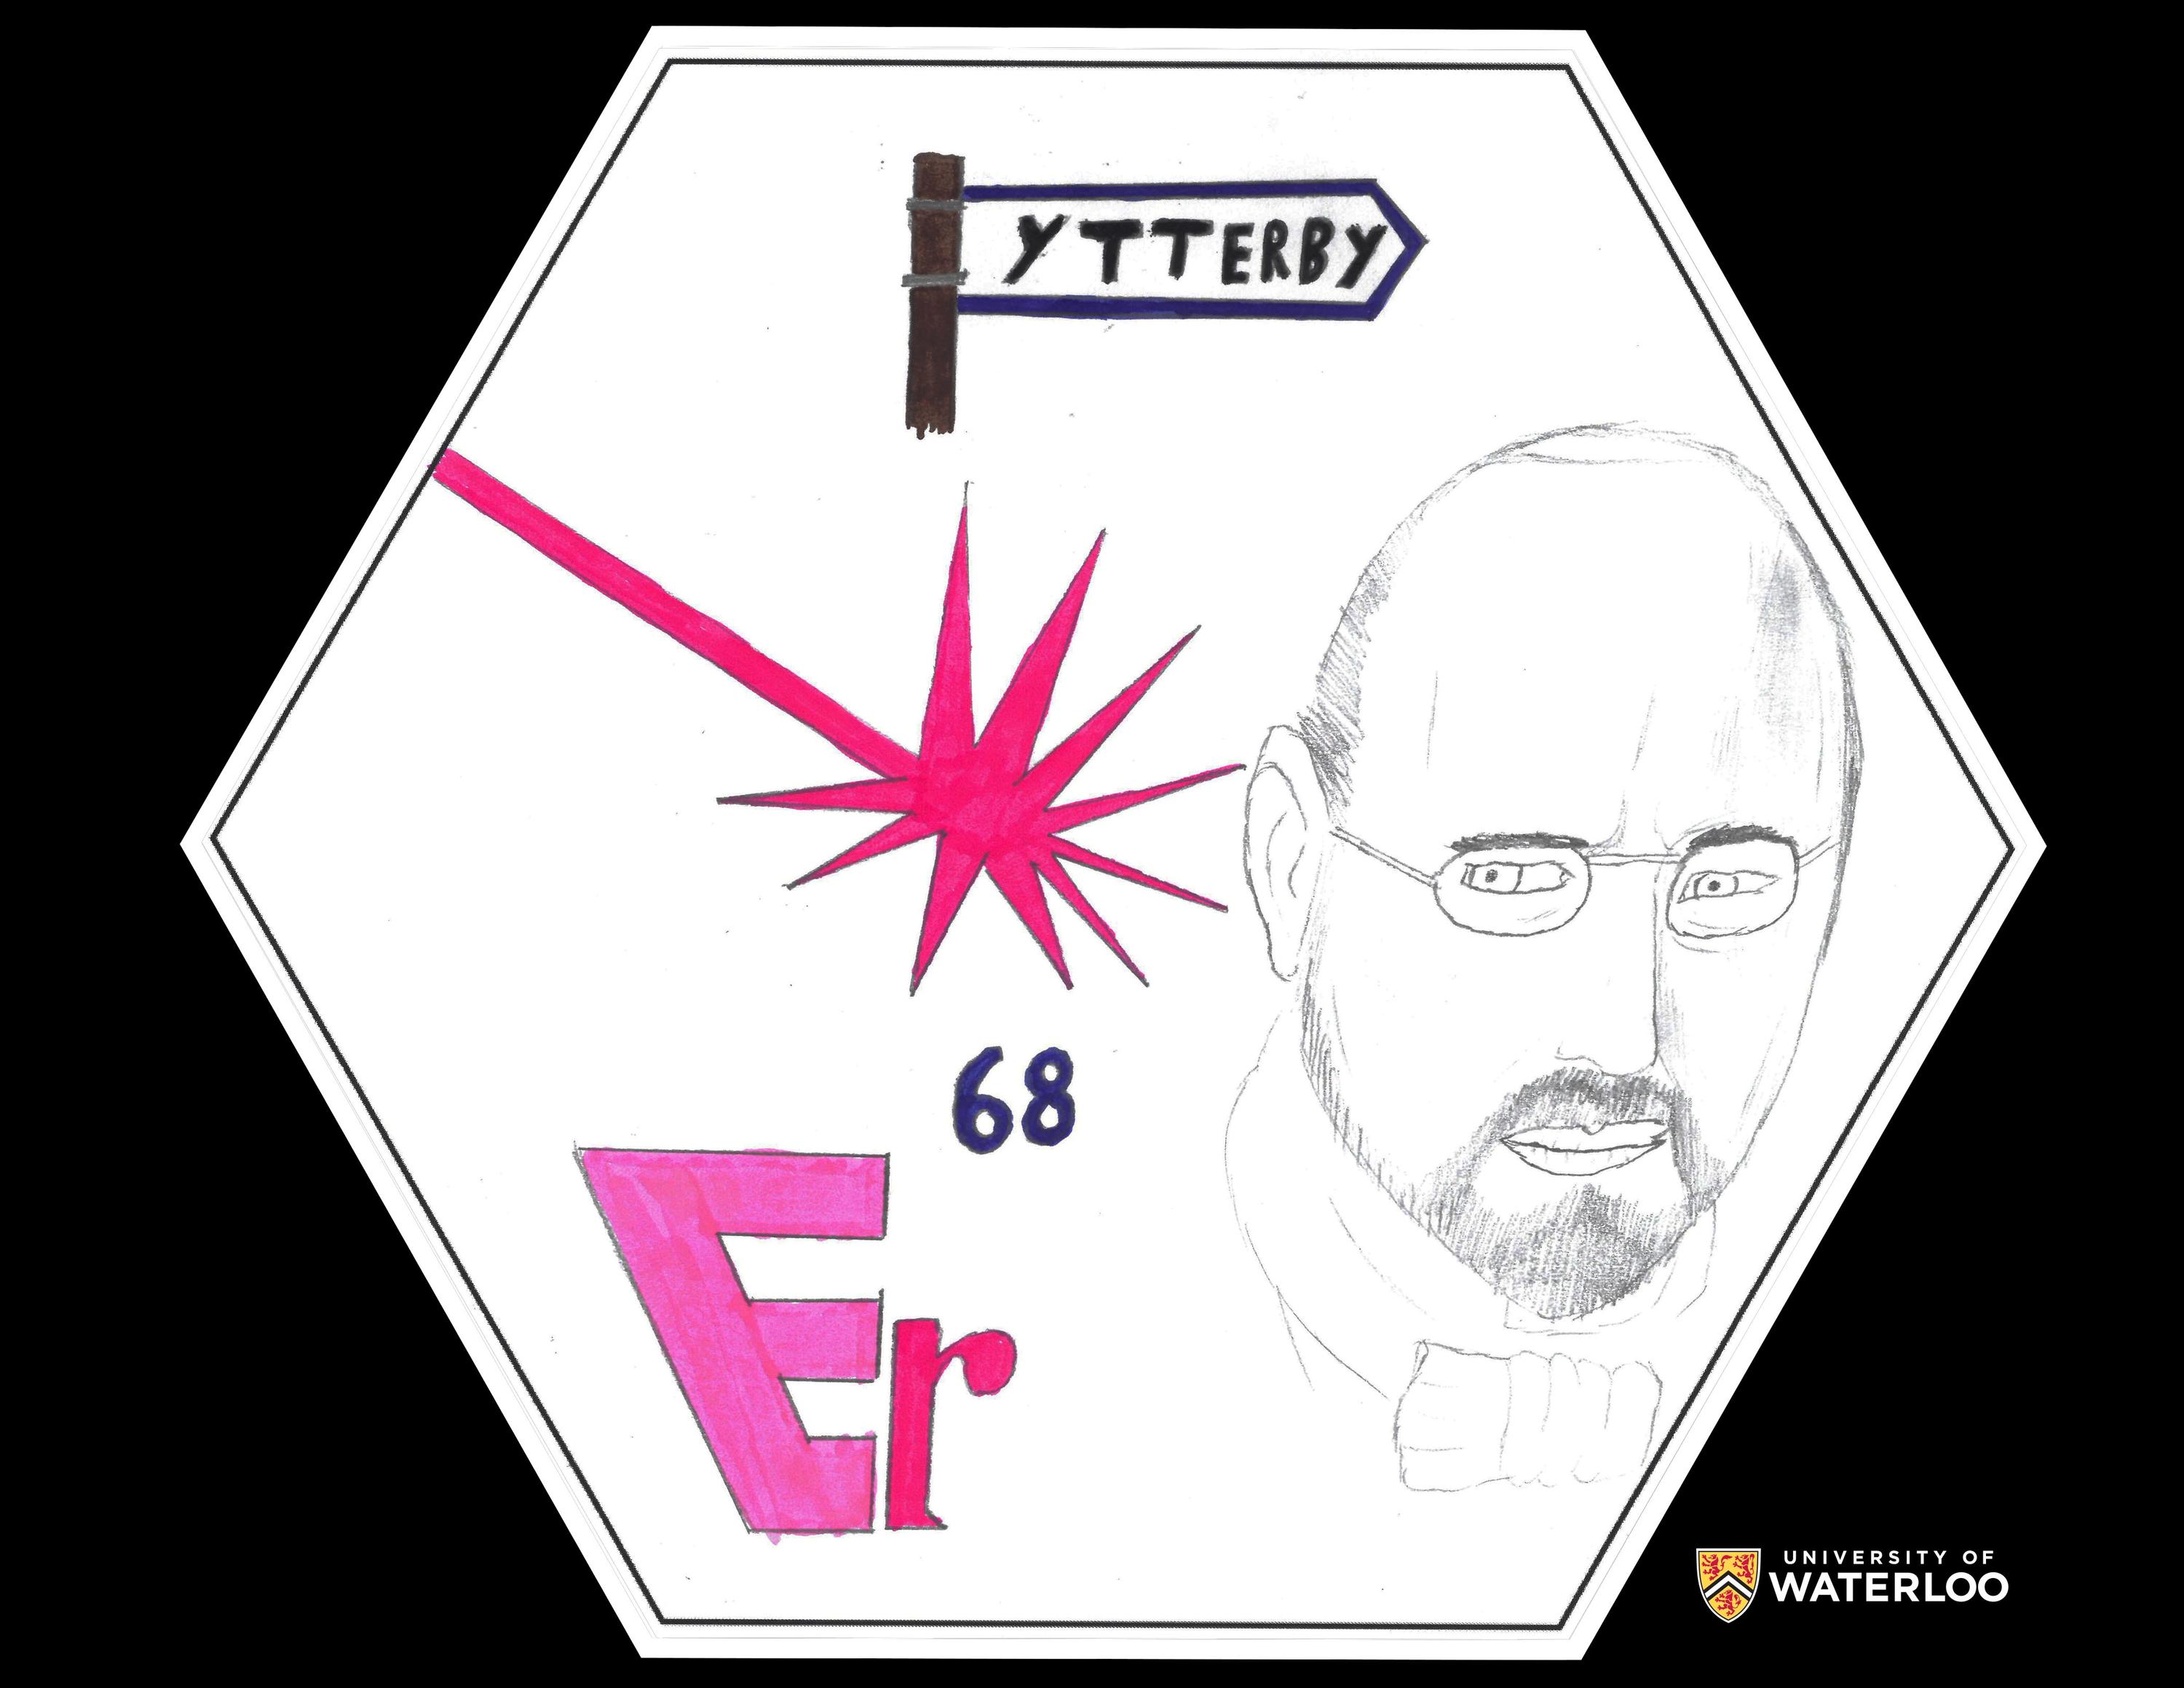 Pencil and ink on white paper. Chemical symbol “Er” in large pink letters appears bottom left; above, the atomic number “68”. A bright pink laser explodes centre. To the right is Carl Gustav Mosander. Above him is a wayfinding sign that says “Ytterby”.